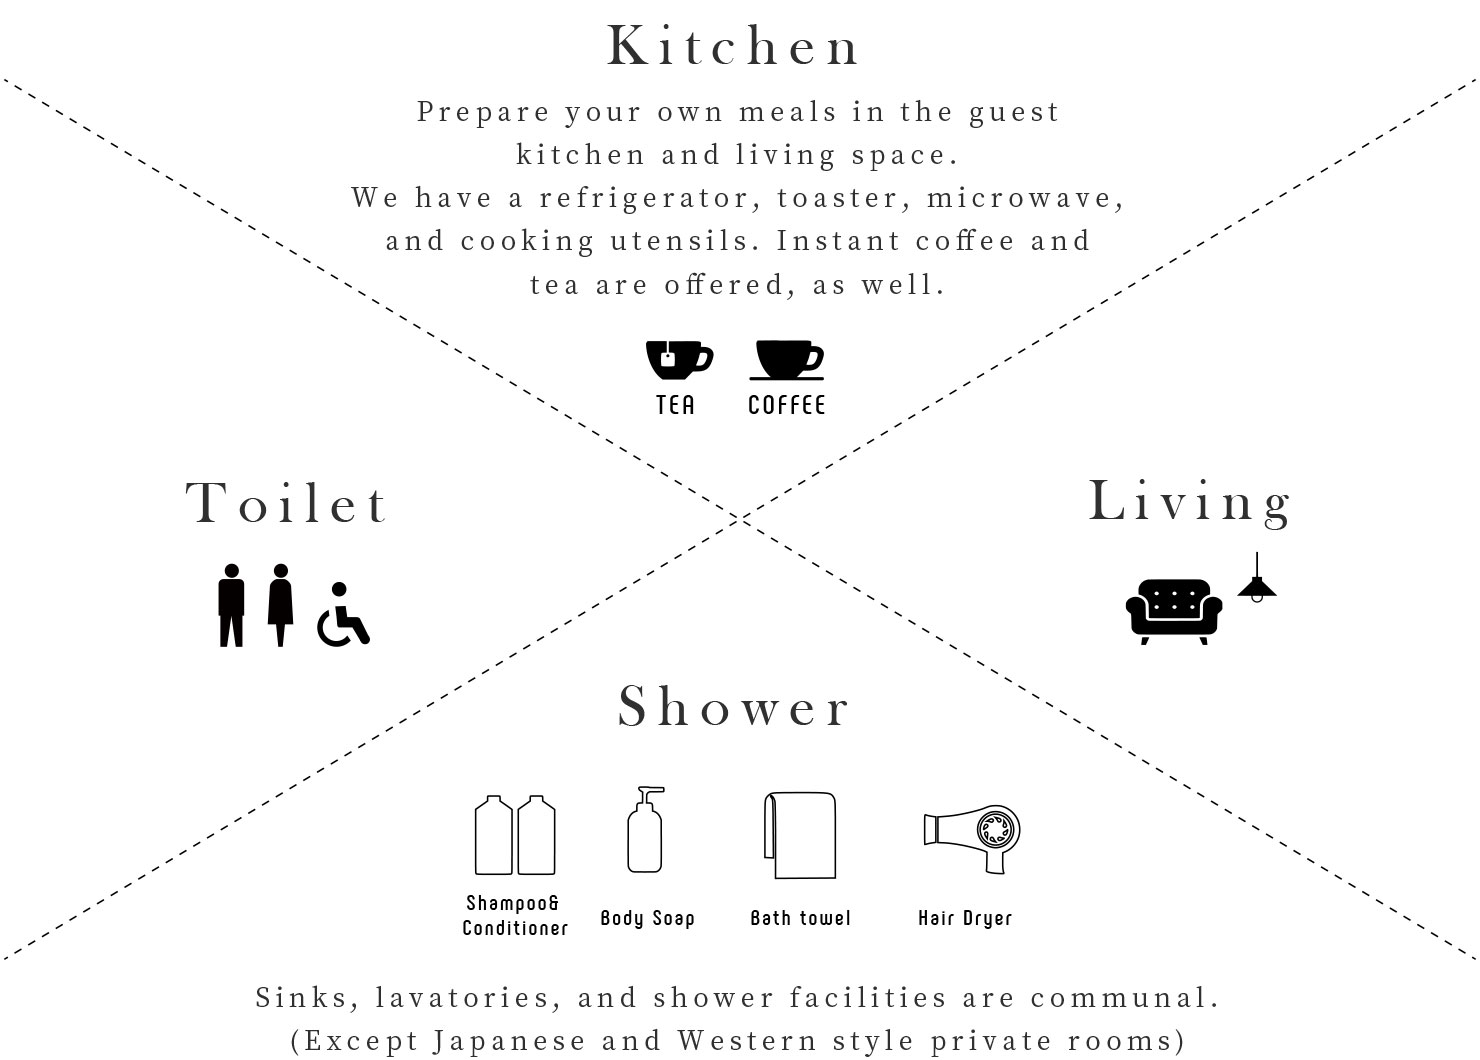 COMMON SPACE - Kitchen / Toilet / Living / Shower